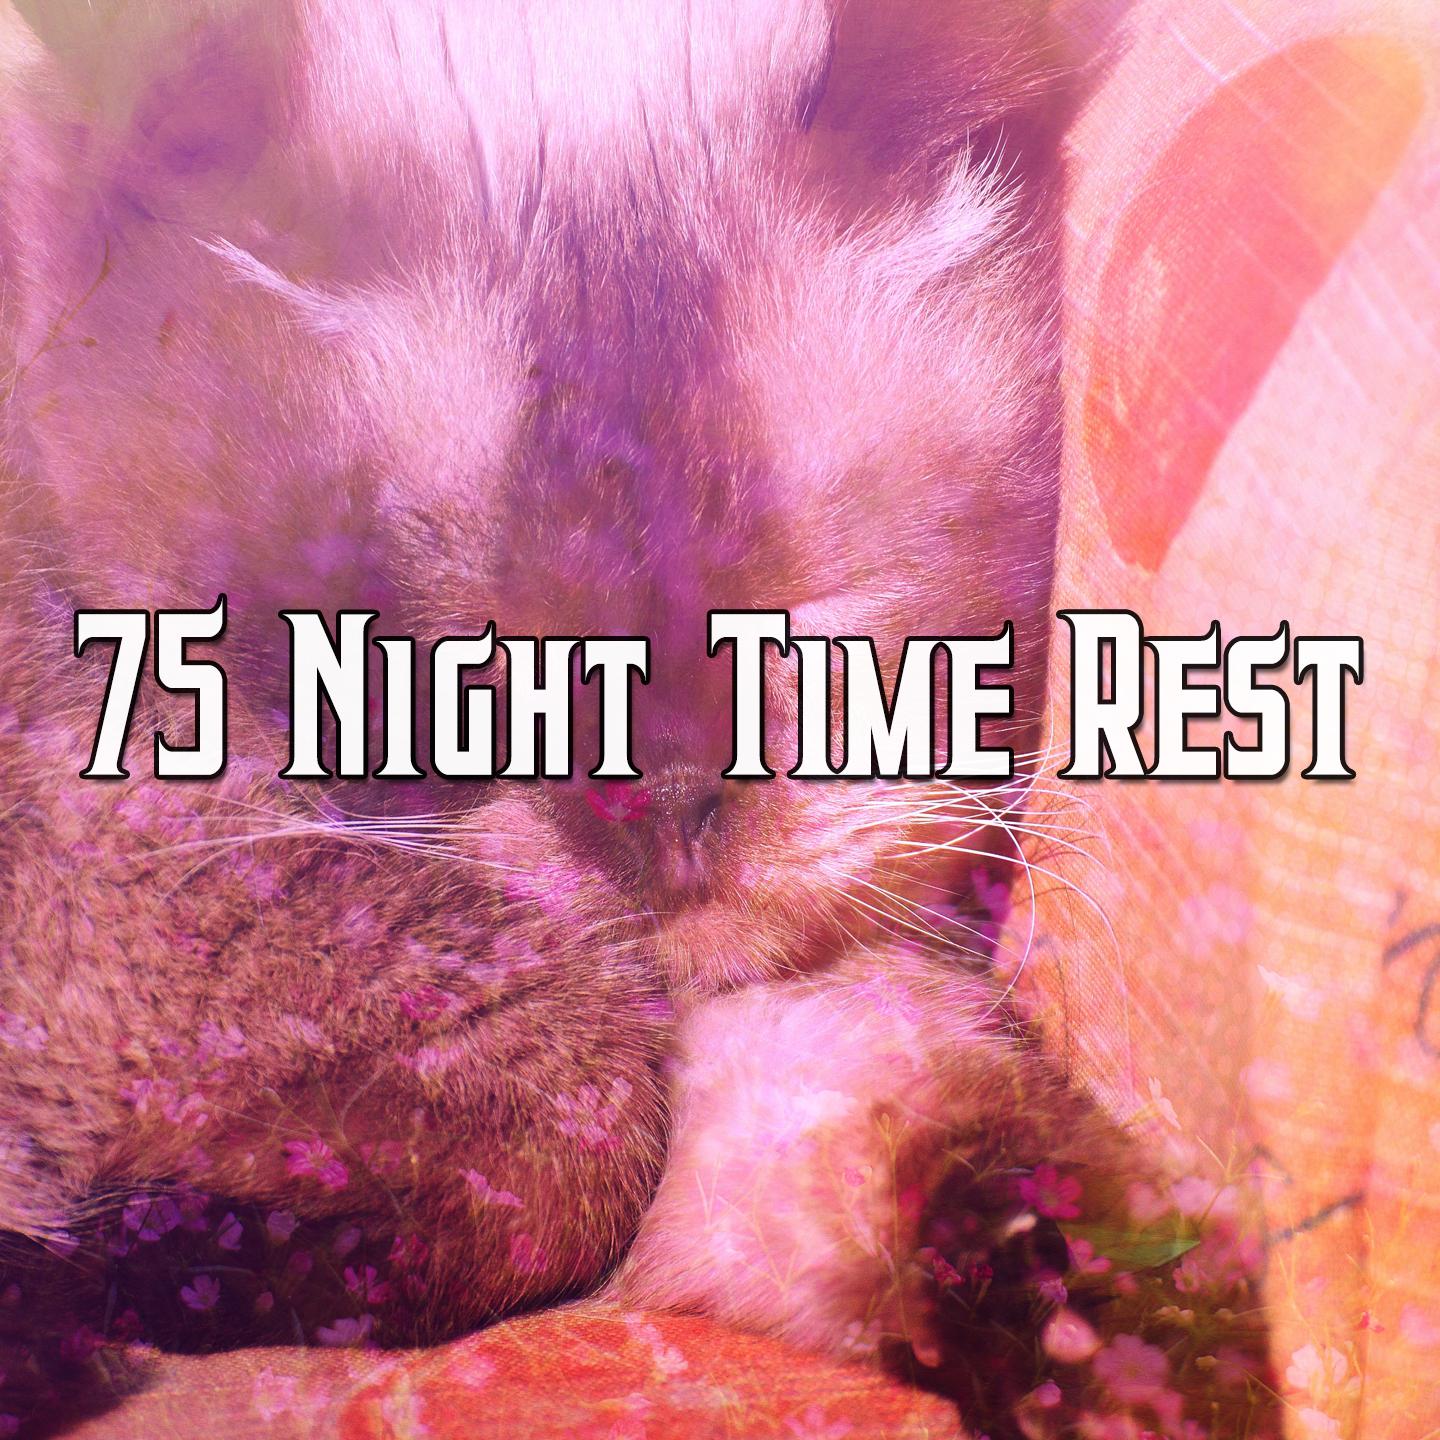 75 Night Time Rest